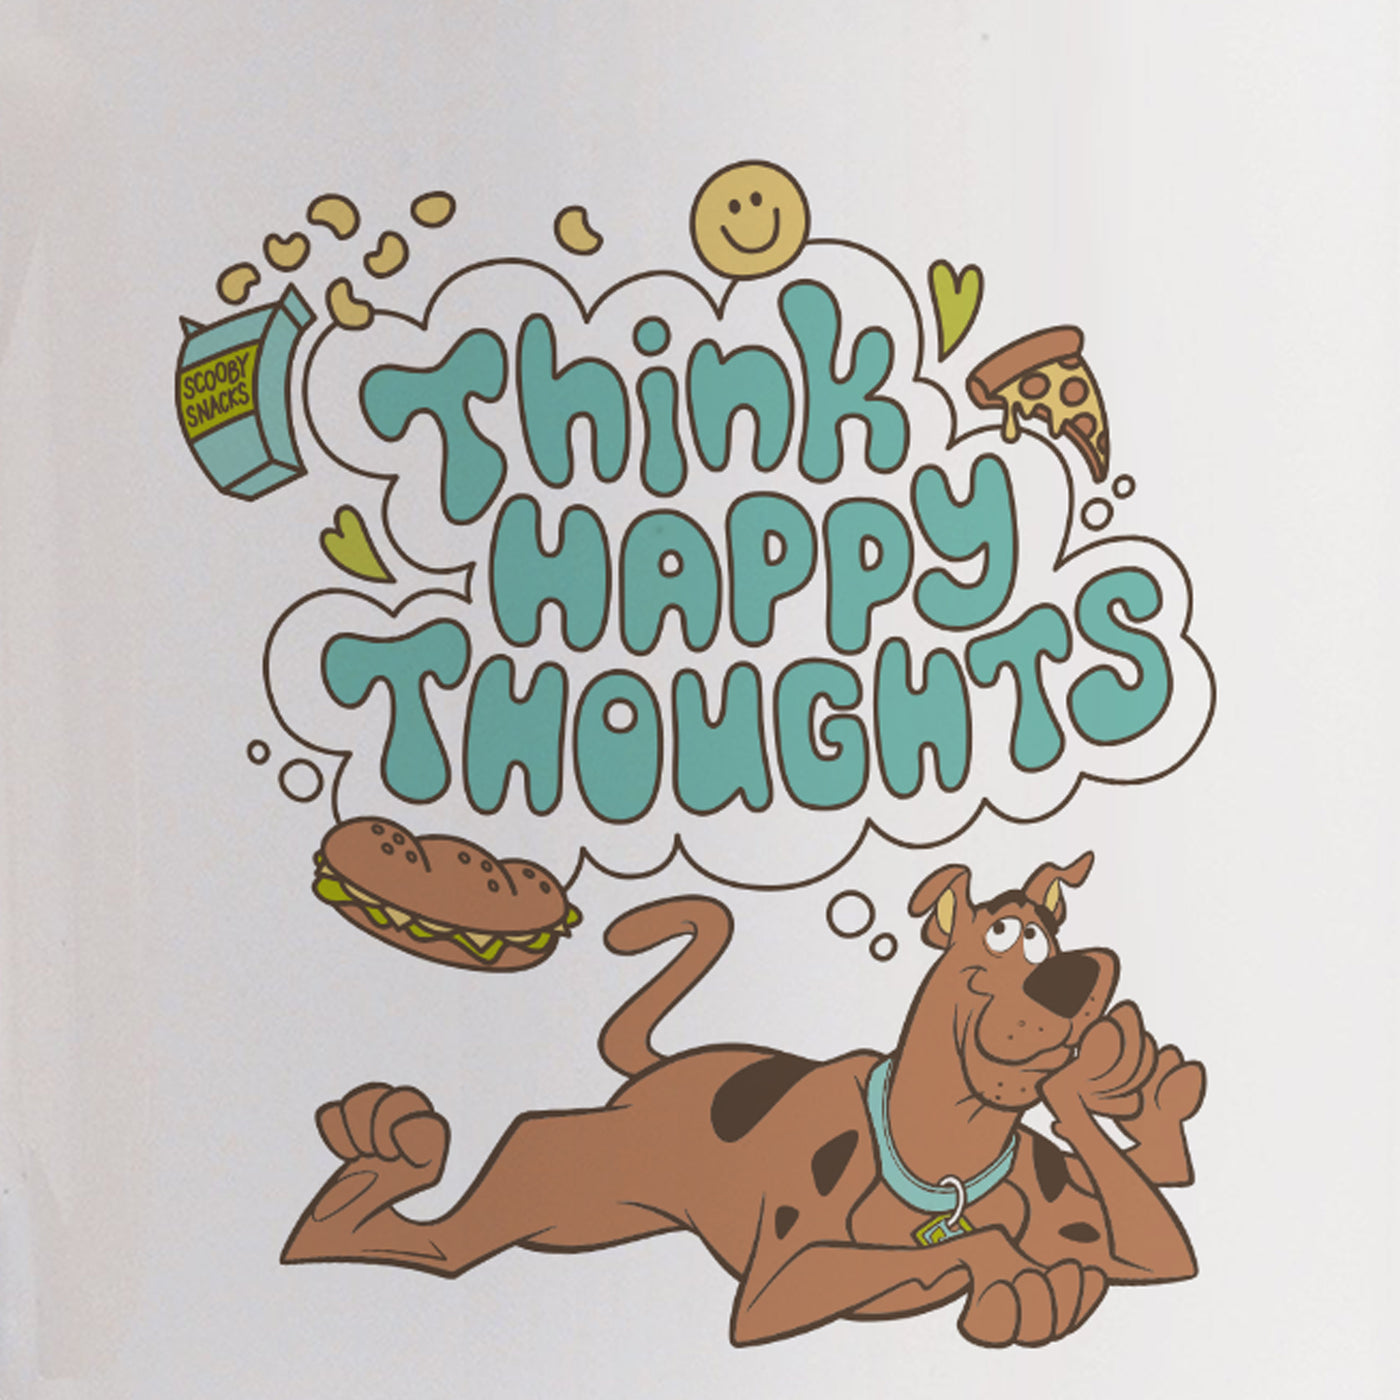 Scooby Doo Think Happy Thoughts Mug